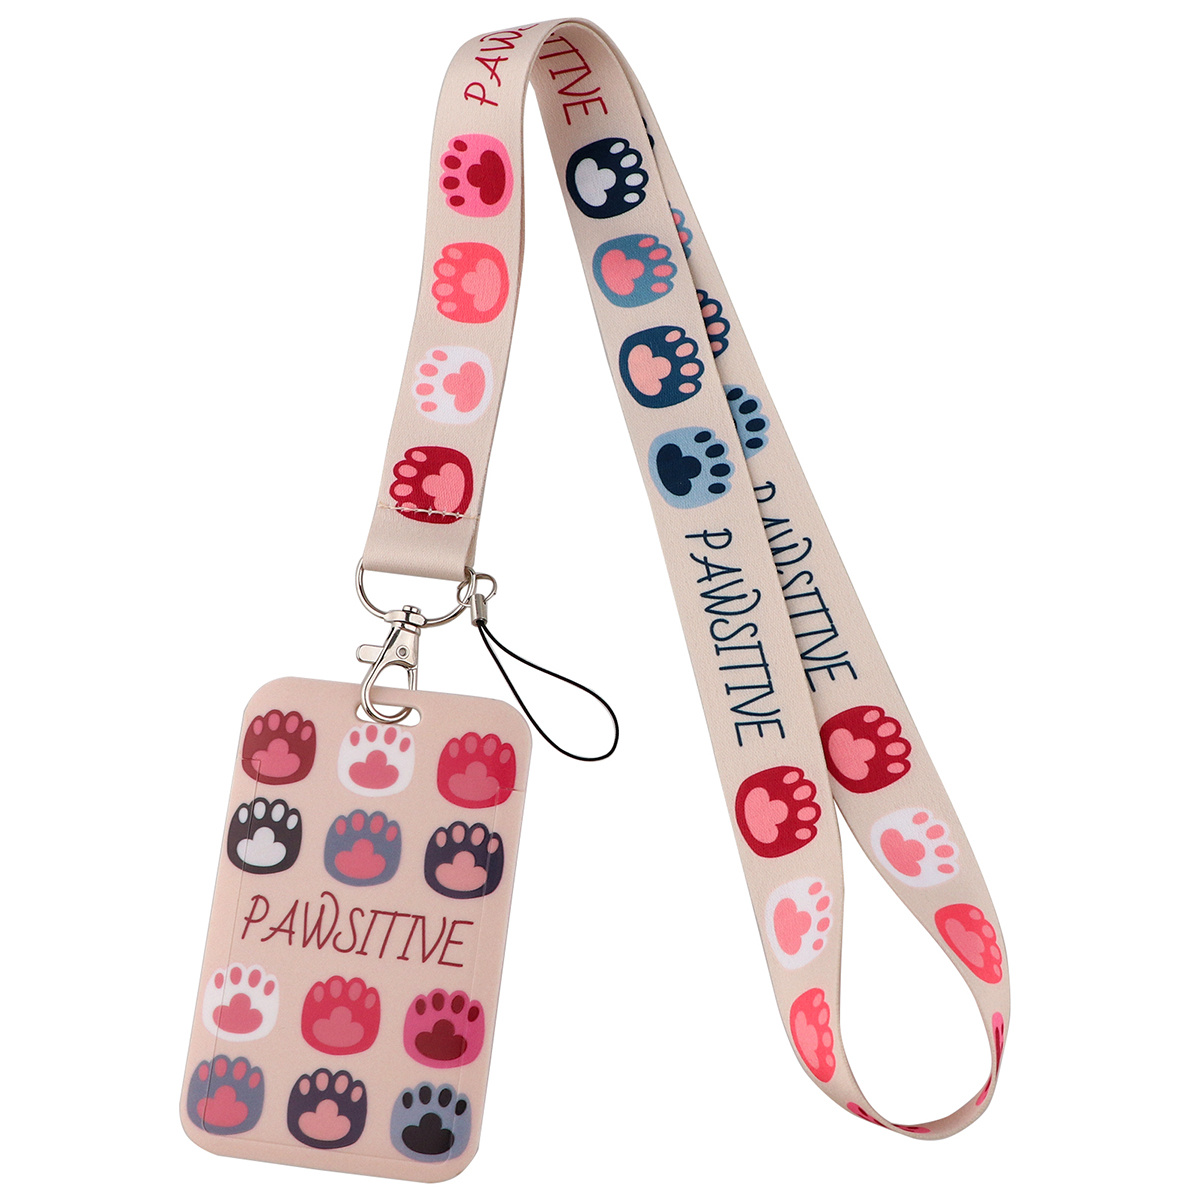  Puppy Dog Paw Lanyards for Id Badges, Cute